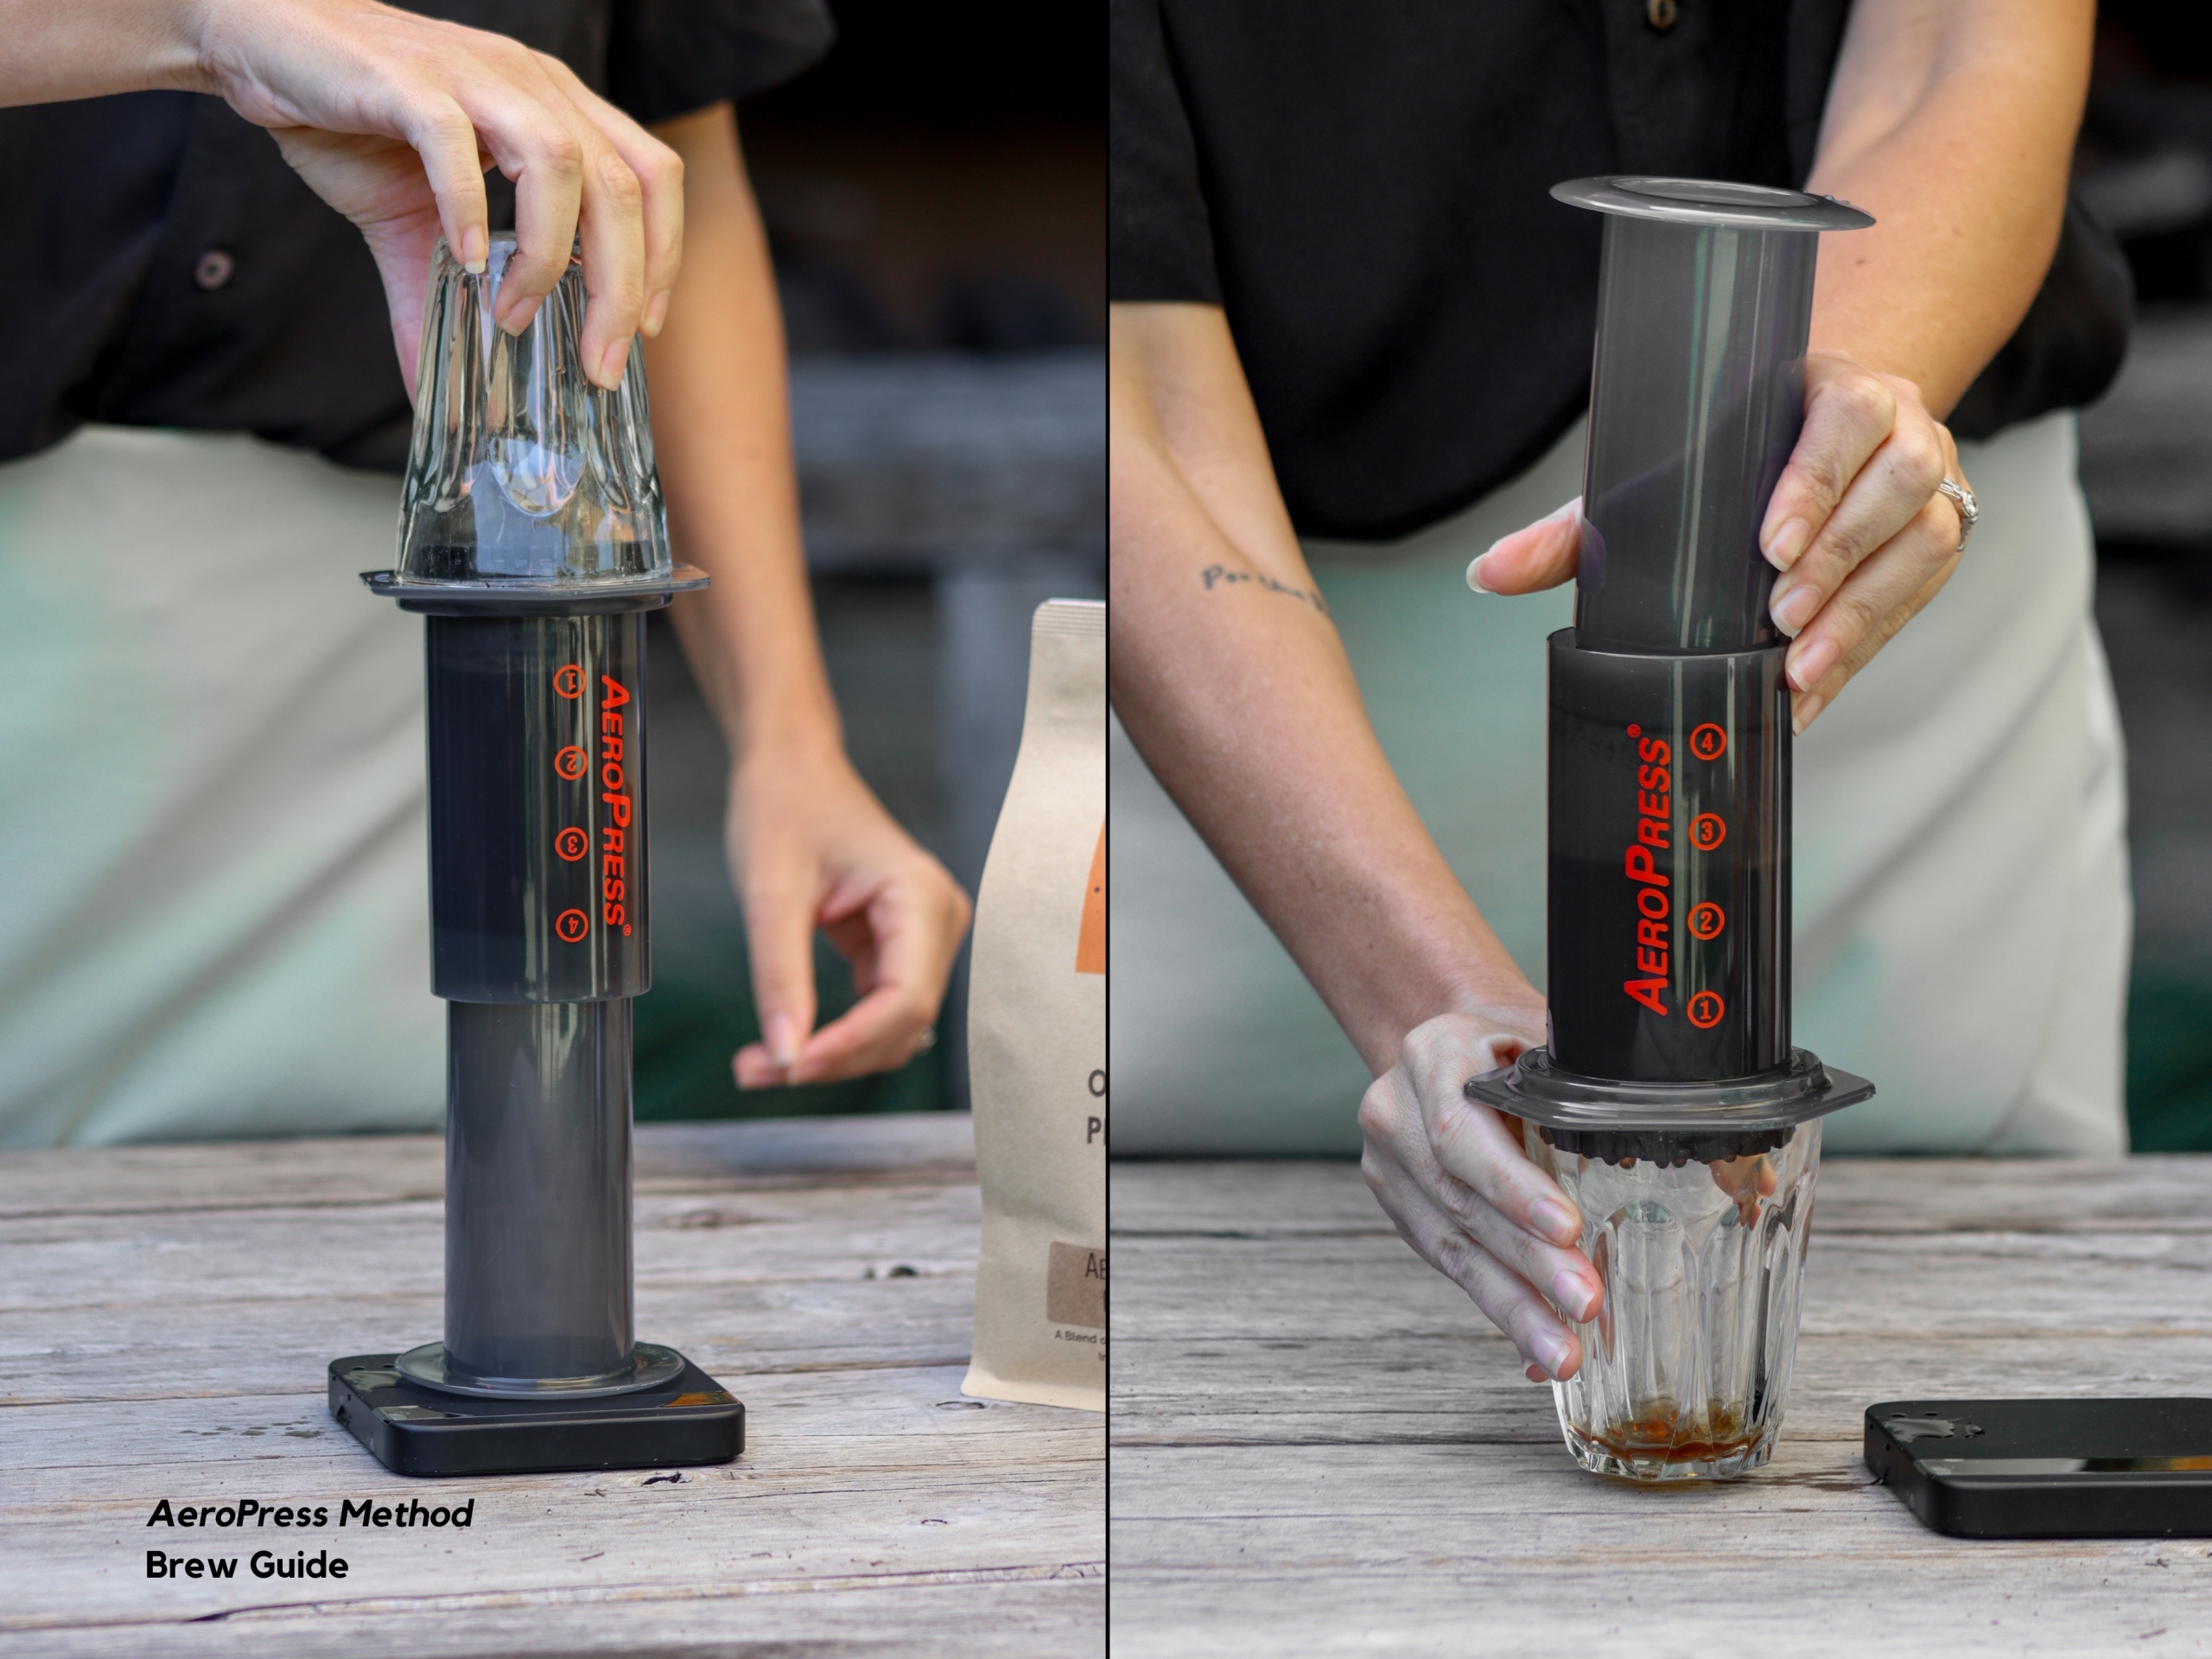 Placing the coffee cup on top of the AeroPress lid, and flipping the Aeropress upside-down